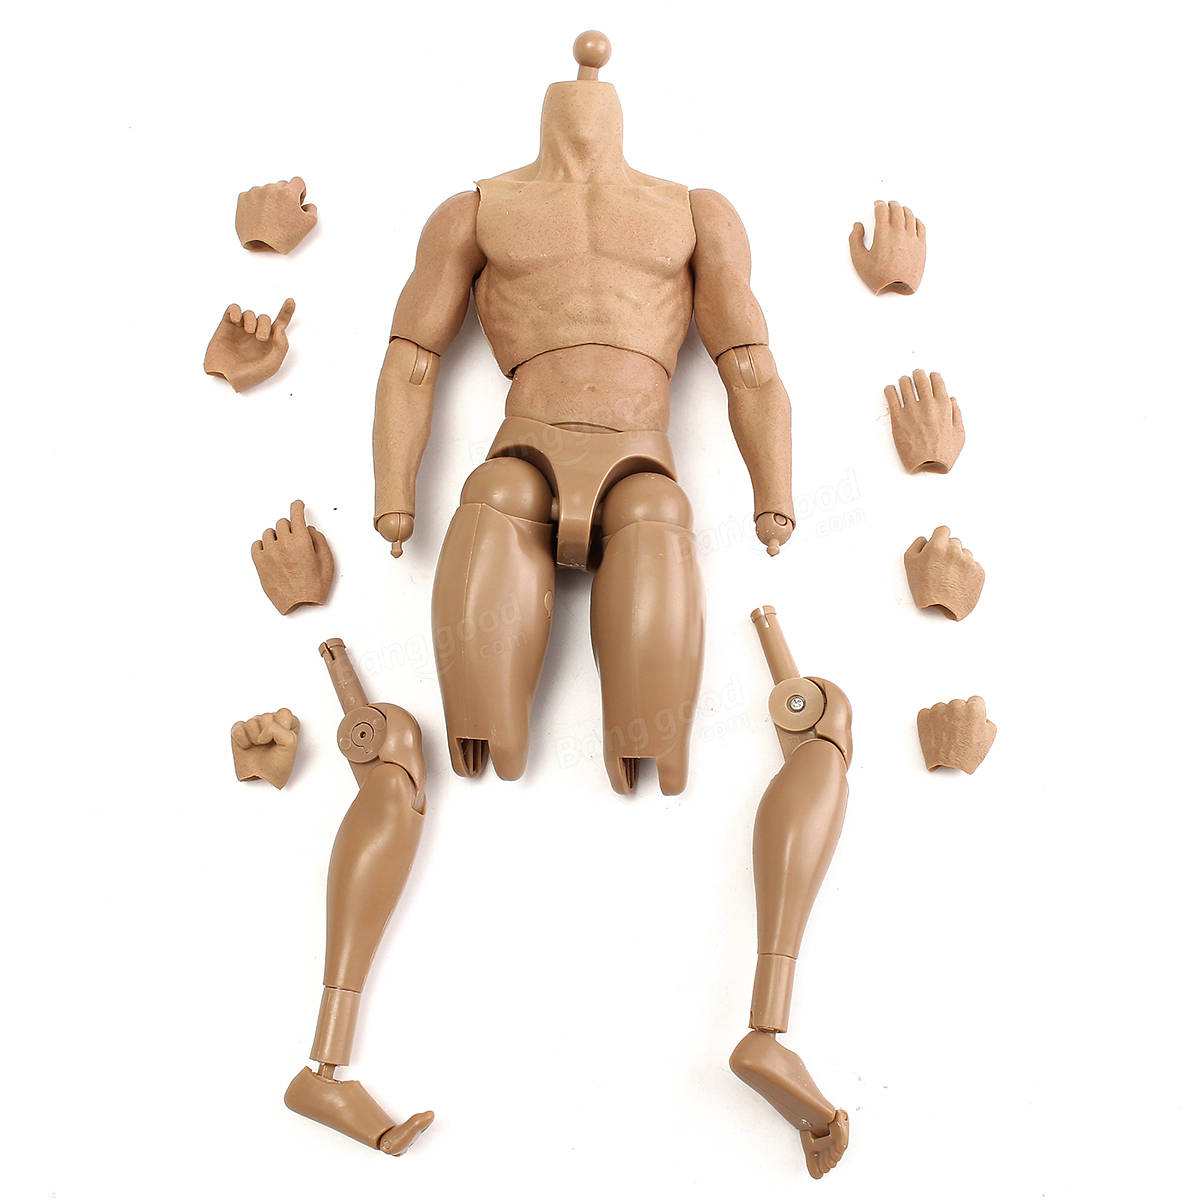 1/6 Scale Action Figure Male Nude Muscular Body 12 